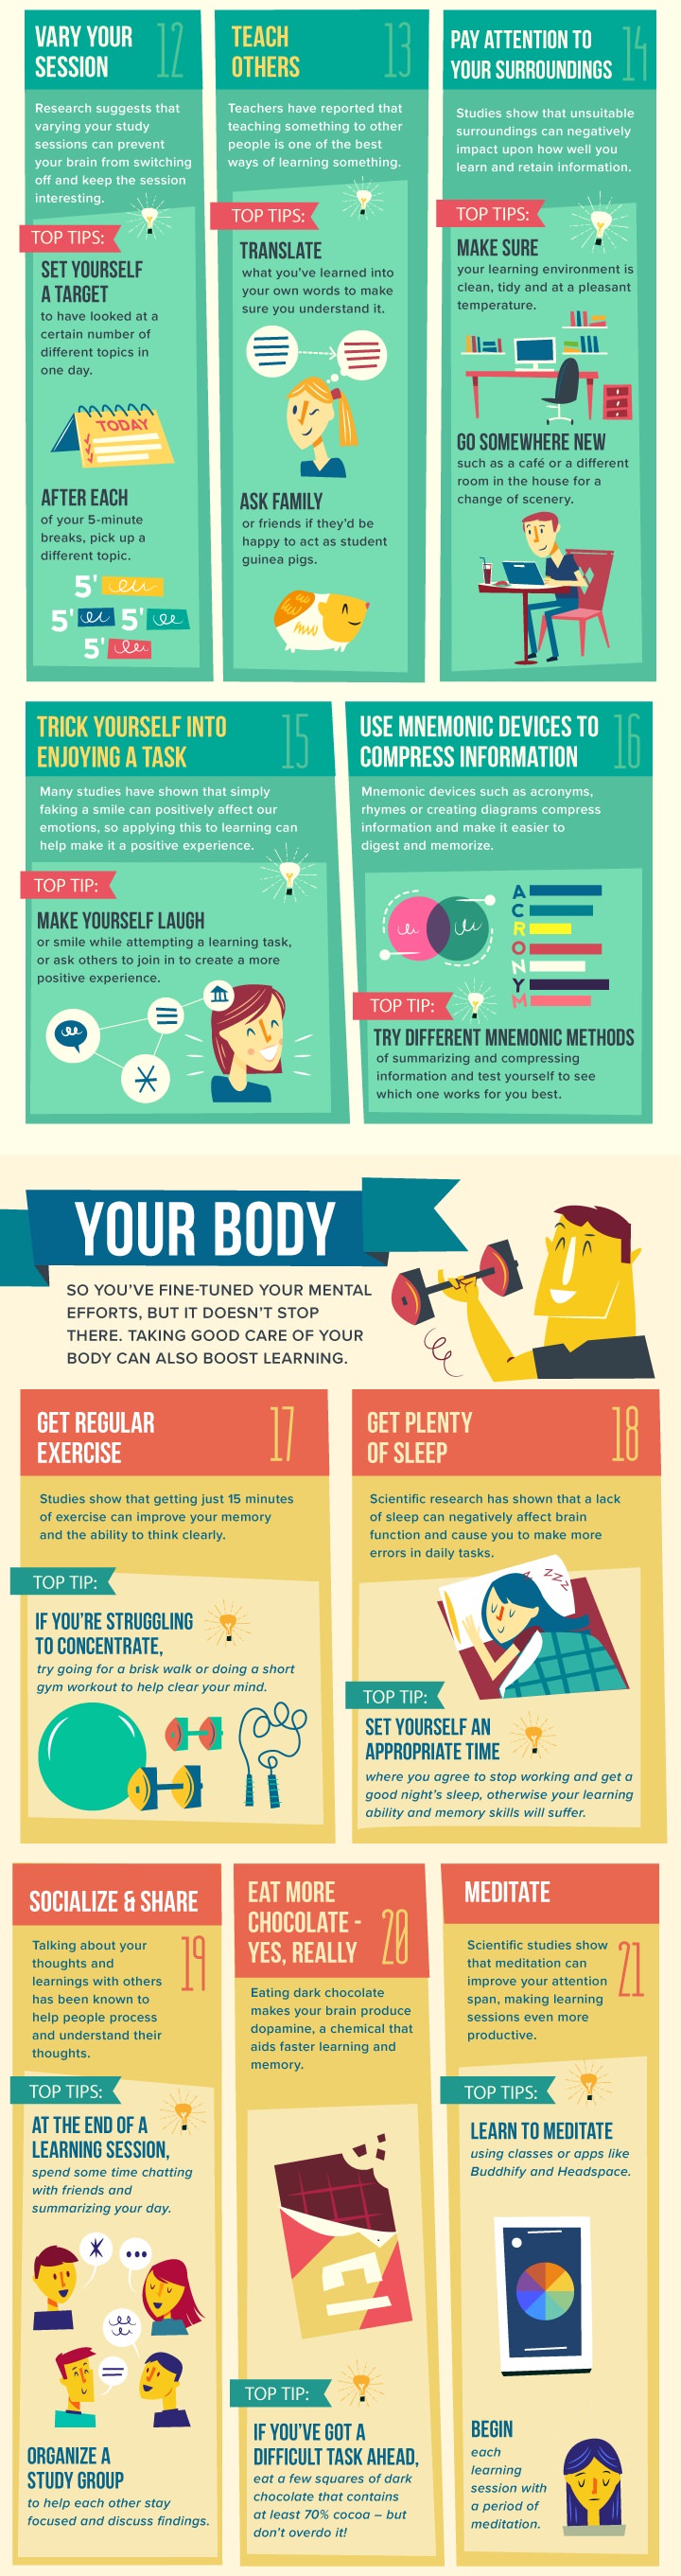 infographic learning